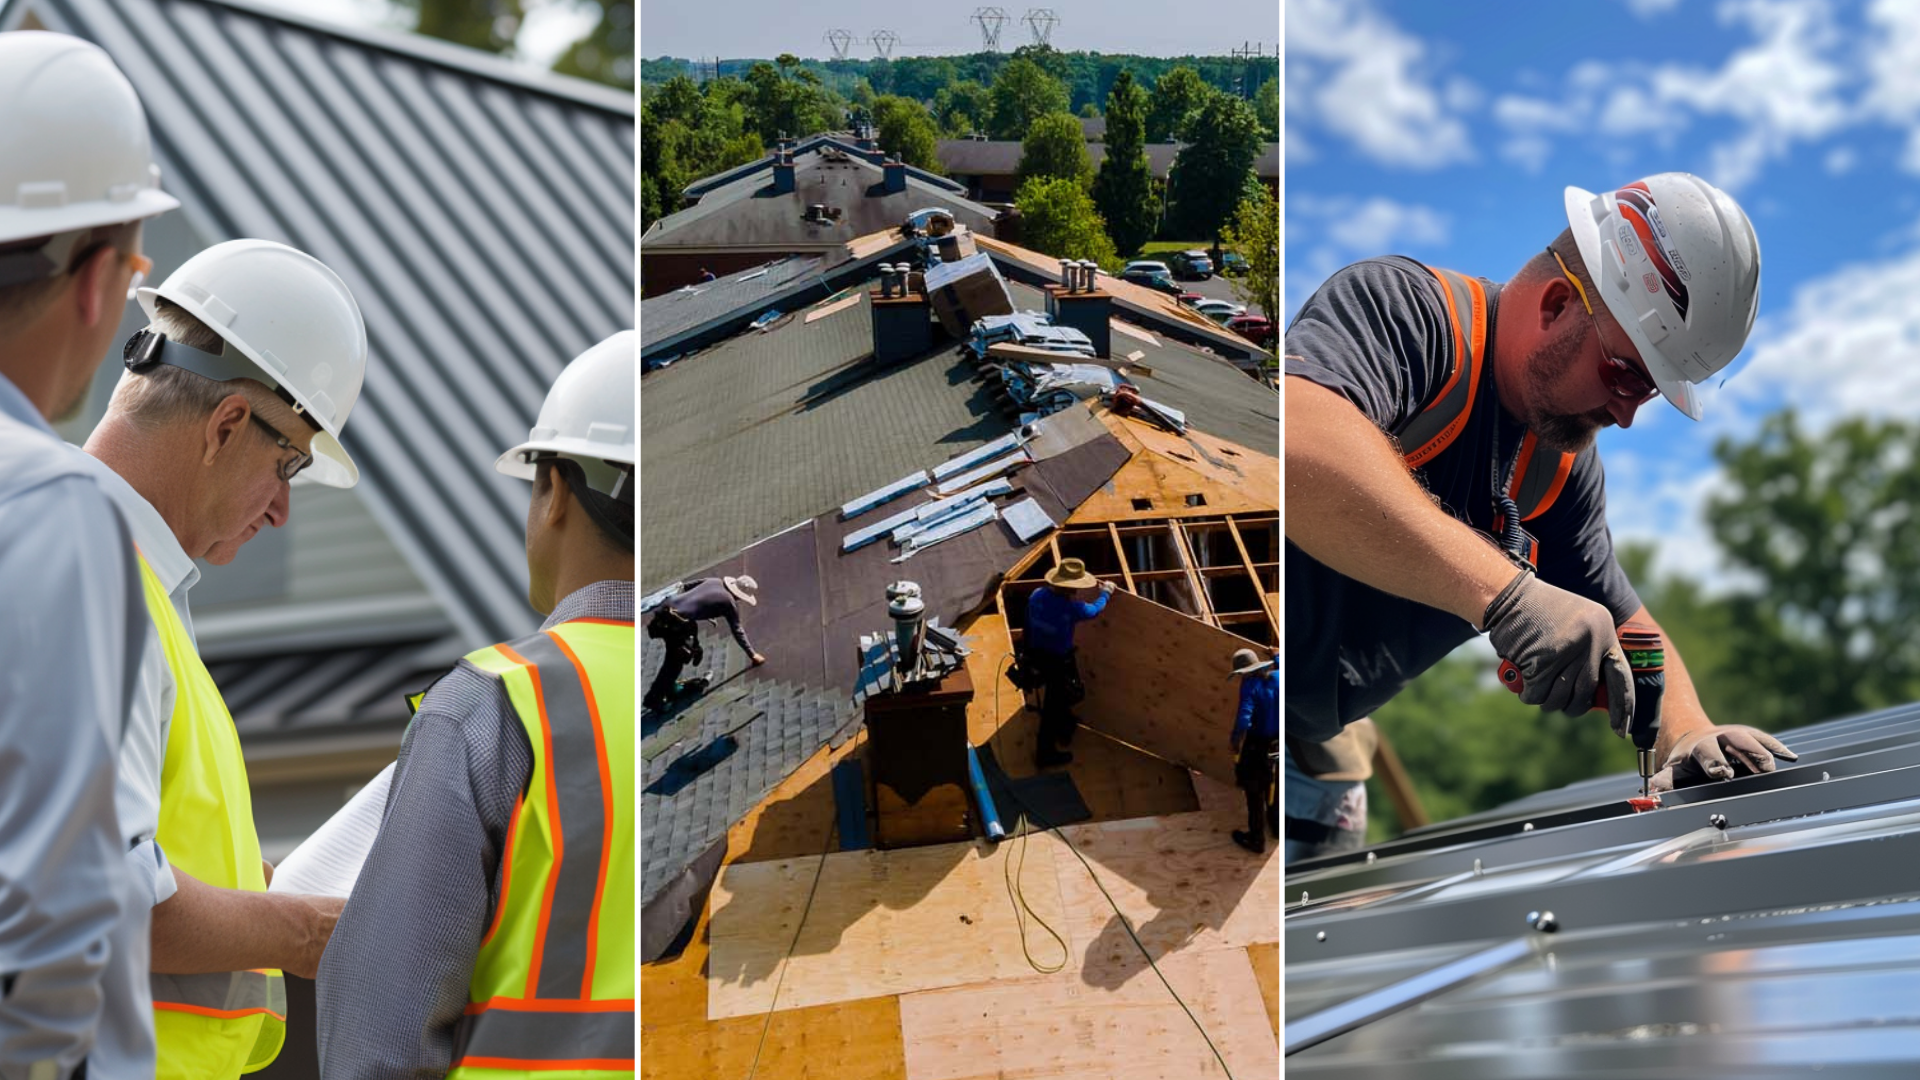 skilled roofing contractors,<br />
Roofer is doing a residential metal roof installation, roofing contractors installing roof decking